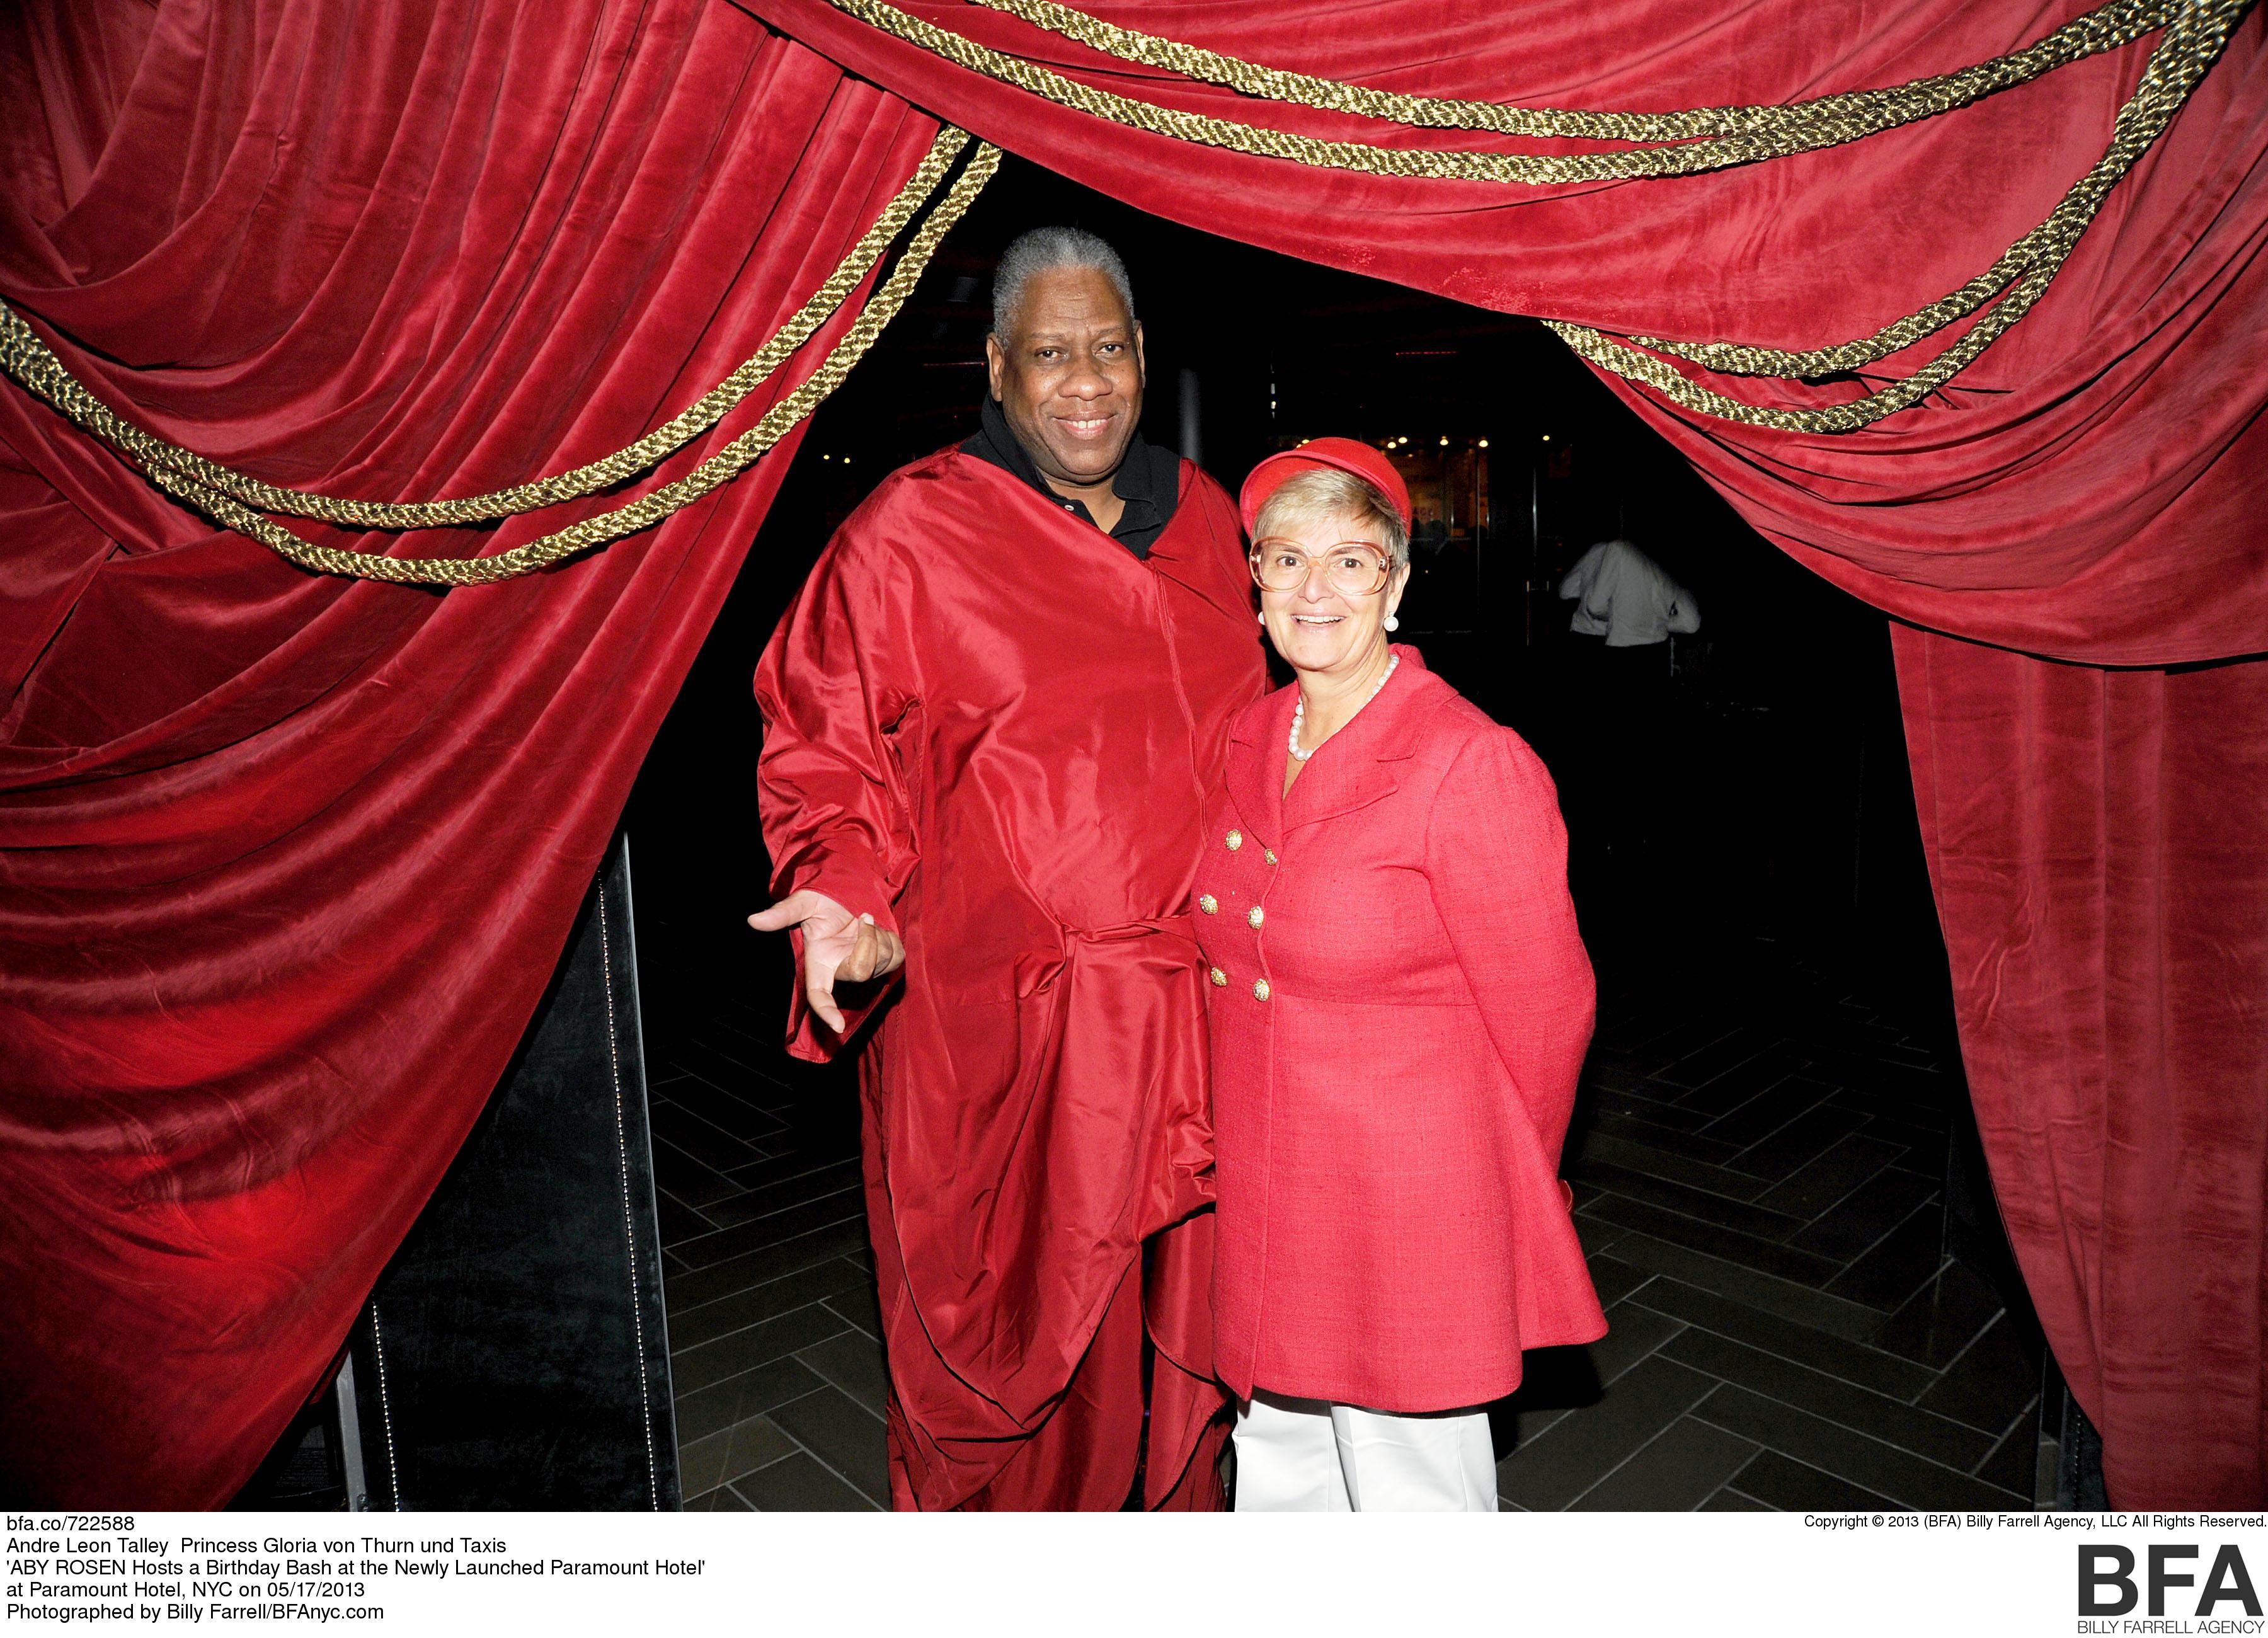 Andre Leon Talley, Princess Gloria von Thurn und TaxisABY ROSEN Hosts a Birthday Bash at the Newly Launched Paramount Hotel